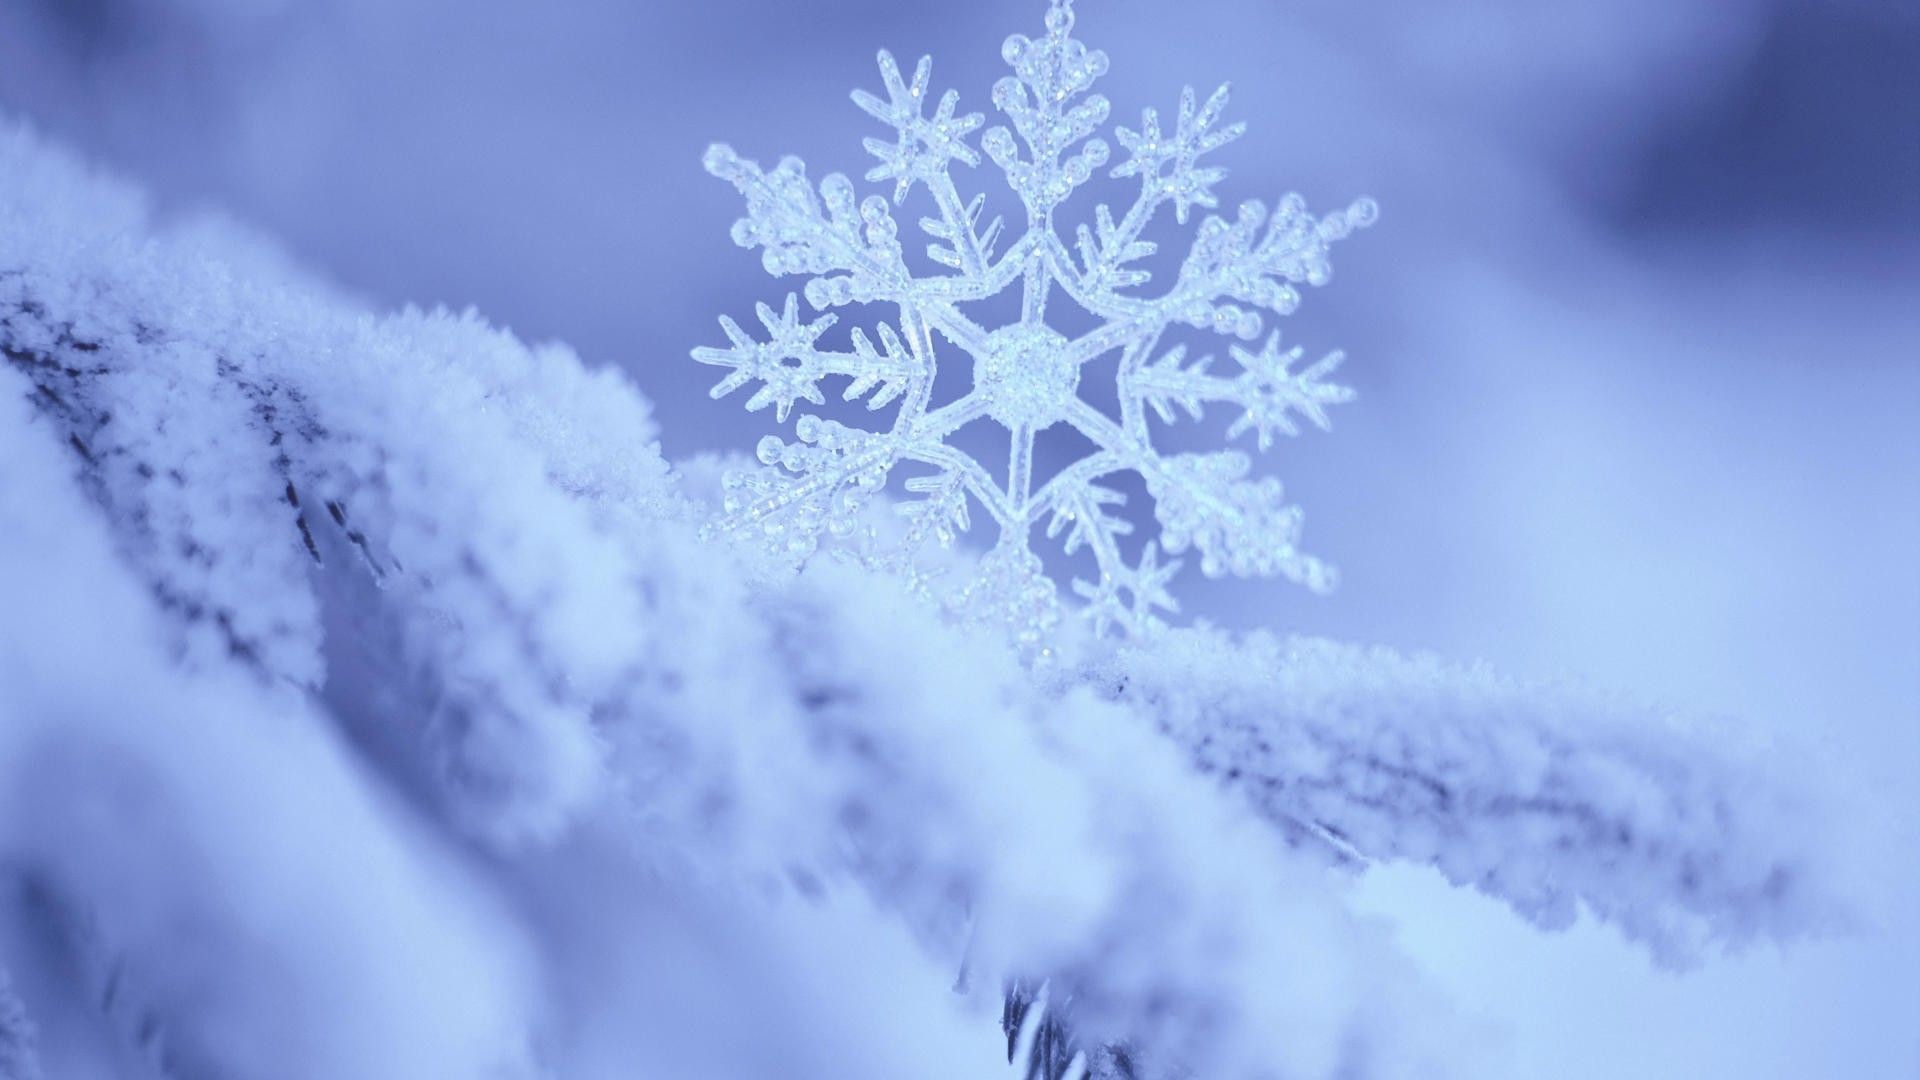 1920x1080 snow flake wallpaper The gallery for --> Snowflake Wallpapers Hd